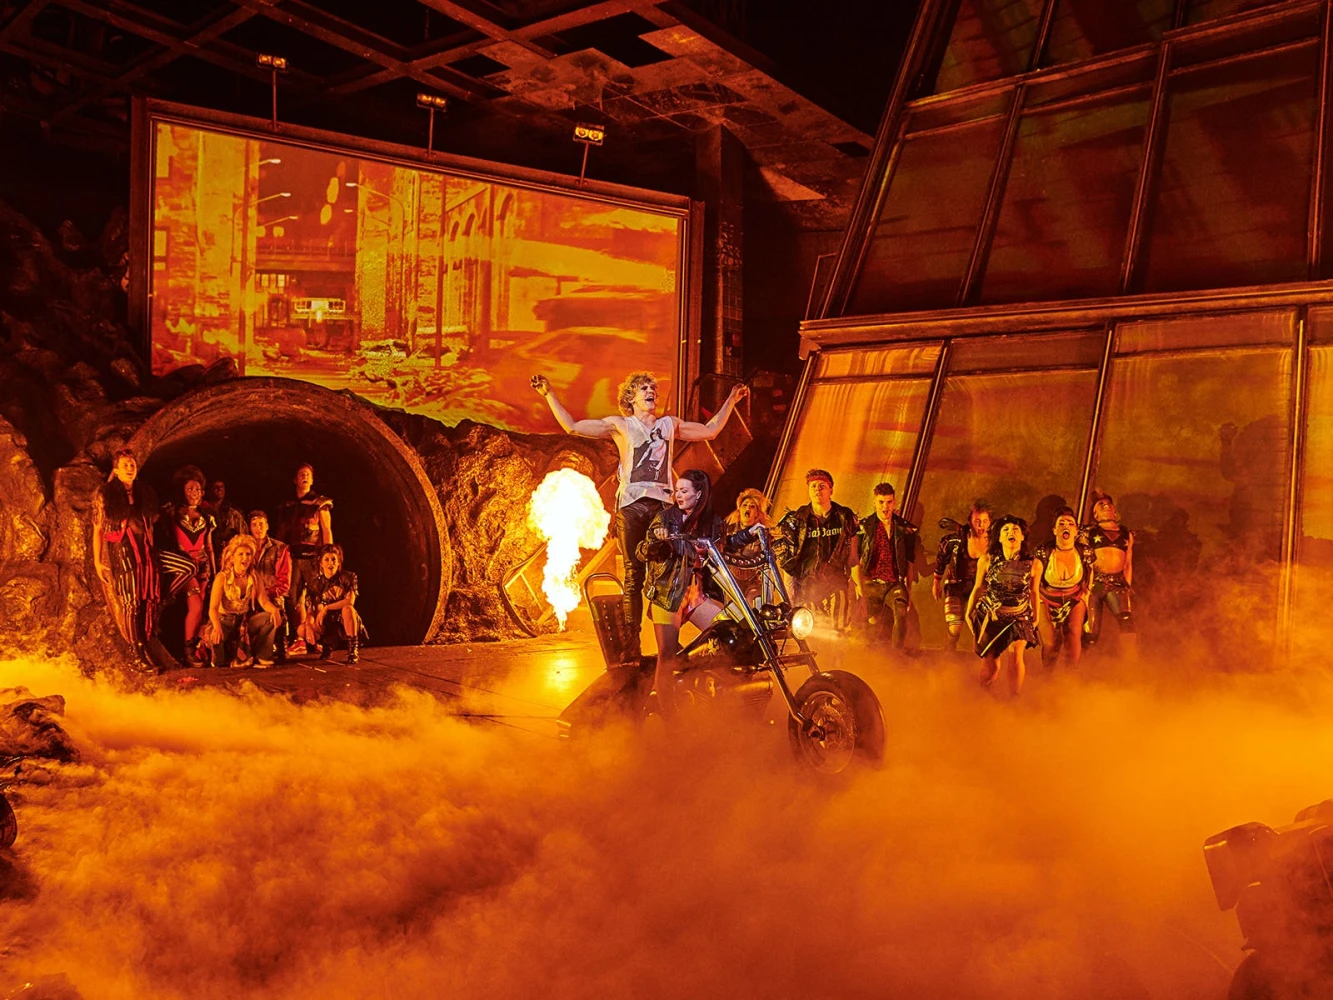 Bat Out of Hell: What to expect - 1